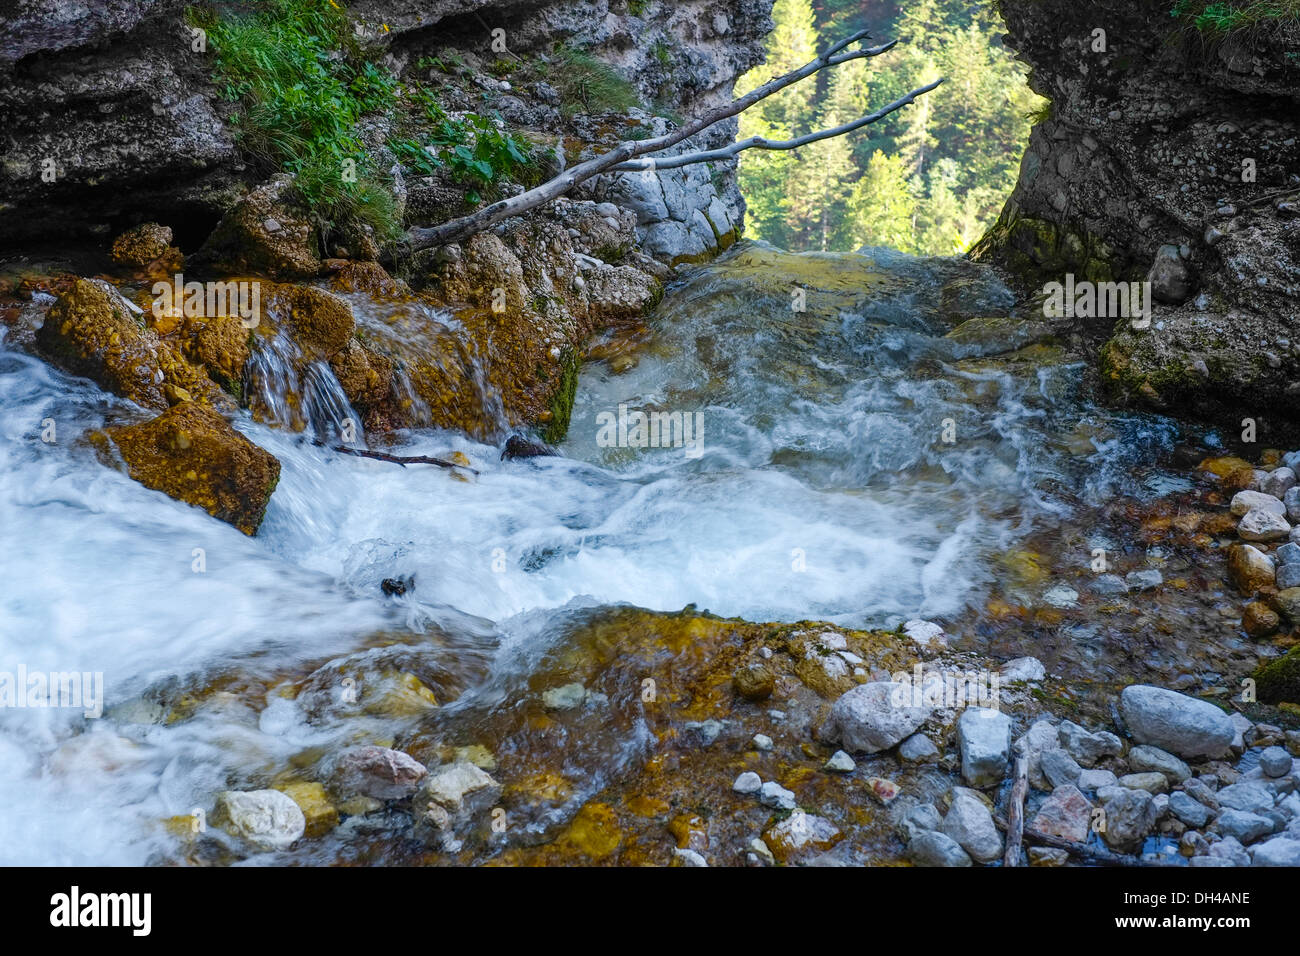 Mountain river and waterfall in Slovenia Stock Photo